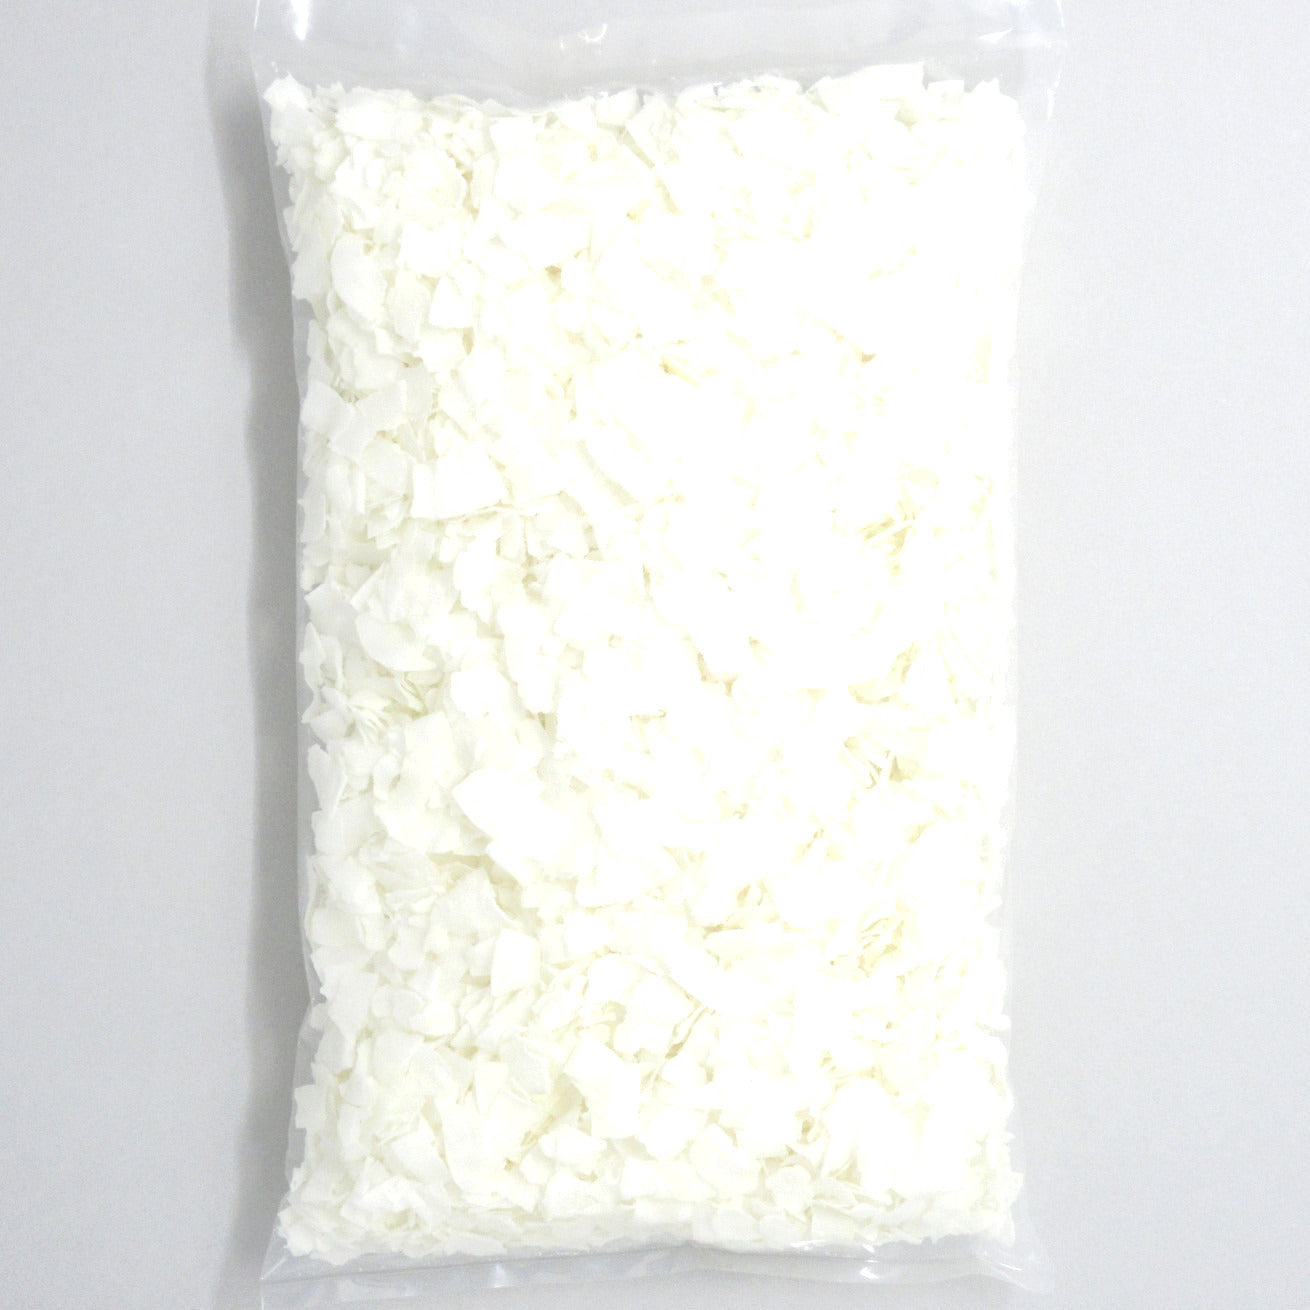 Flour Barrel product image - Coconut Chips Unsweetened